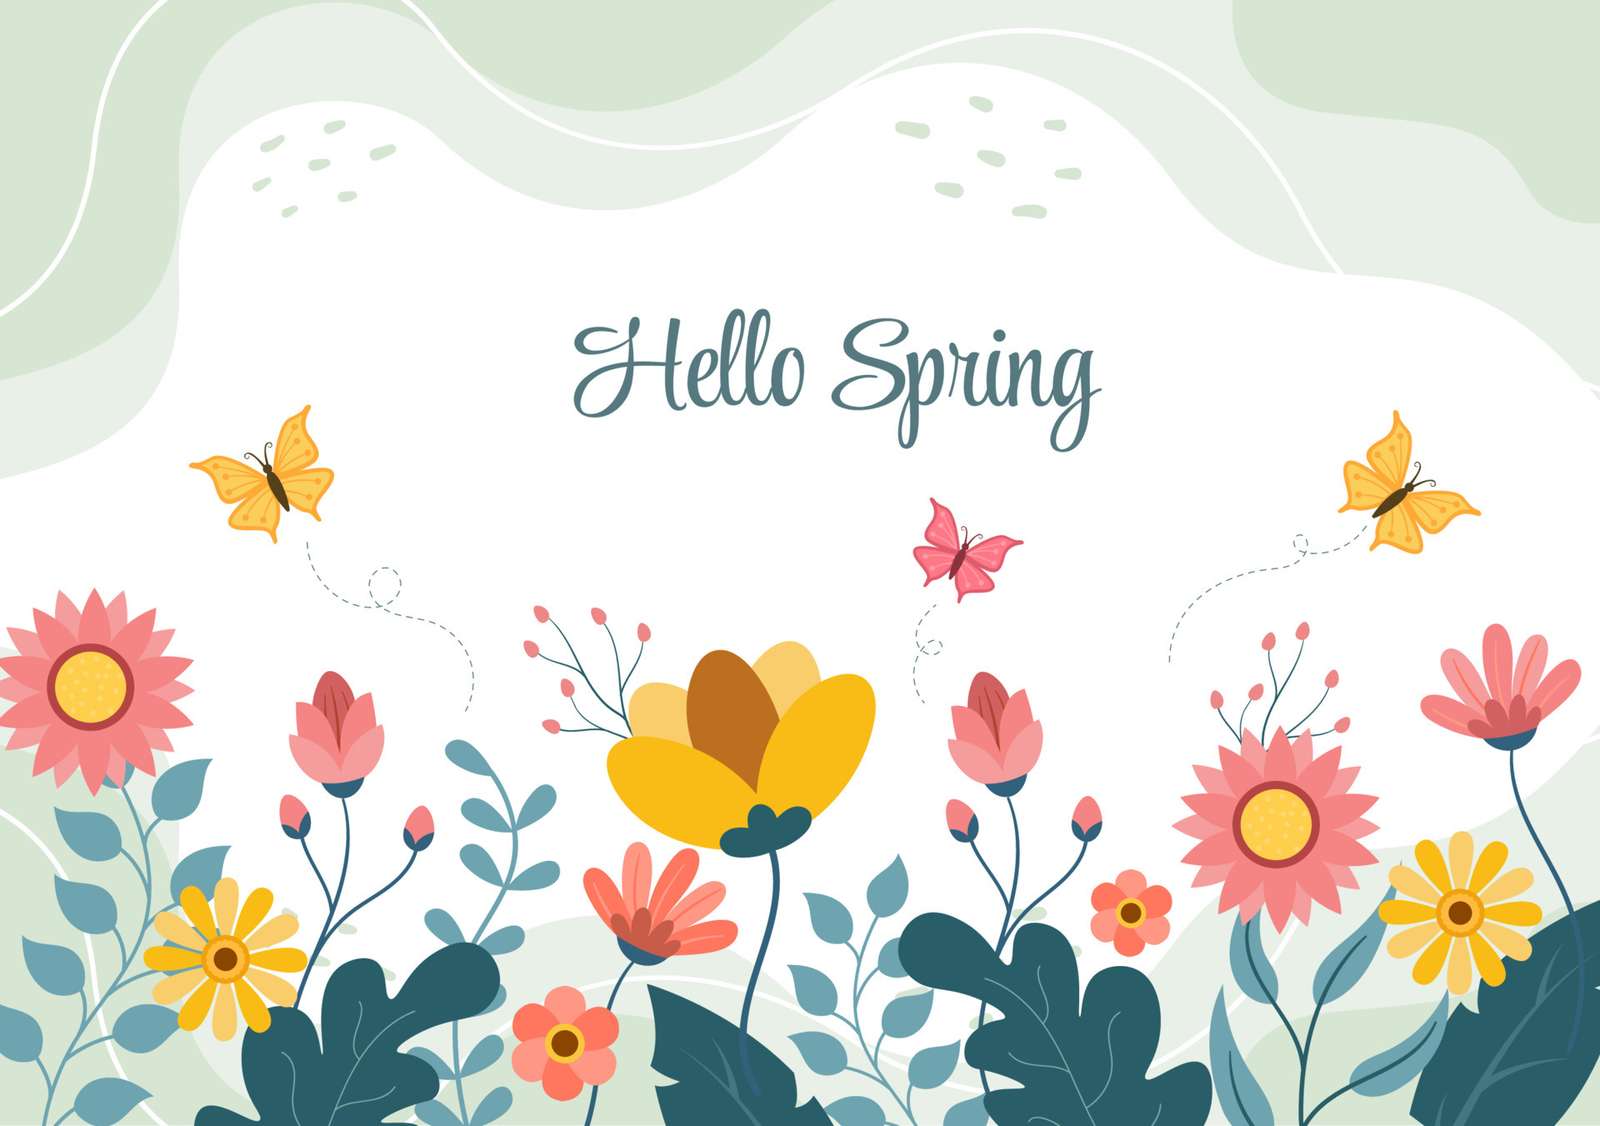 Spring is in the Air online puzzle